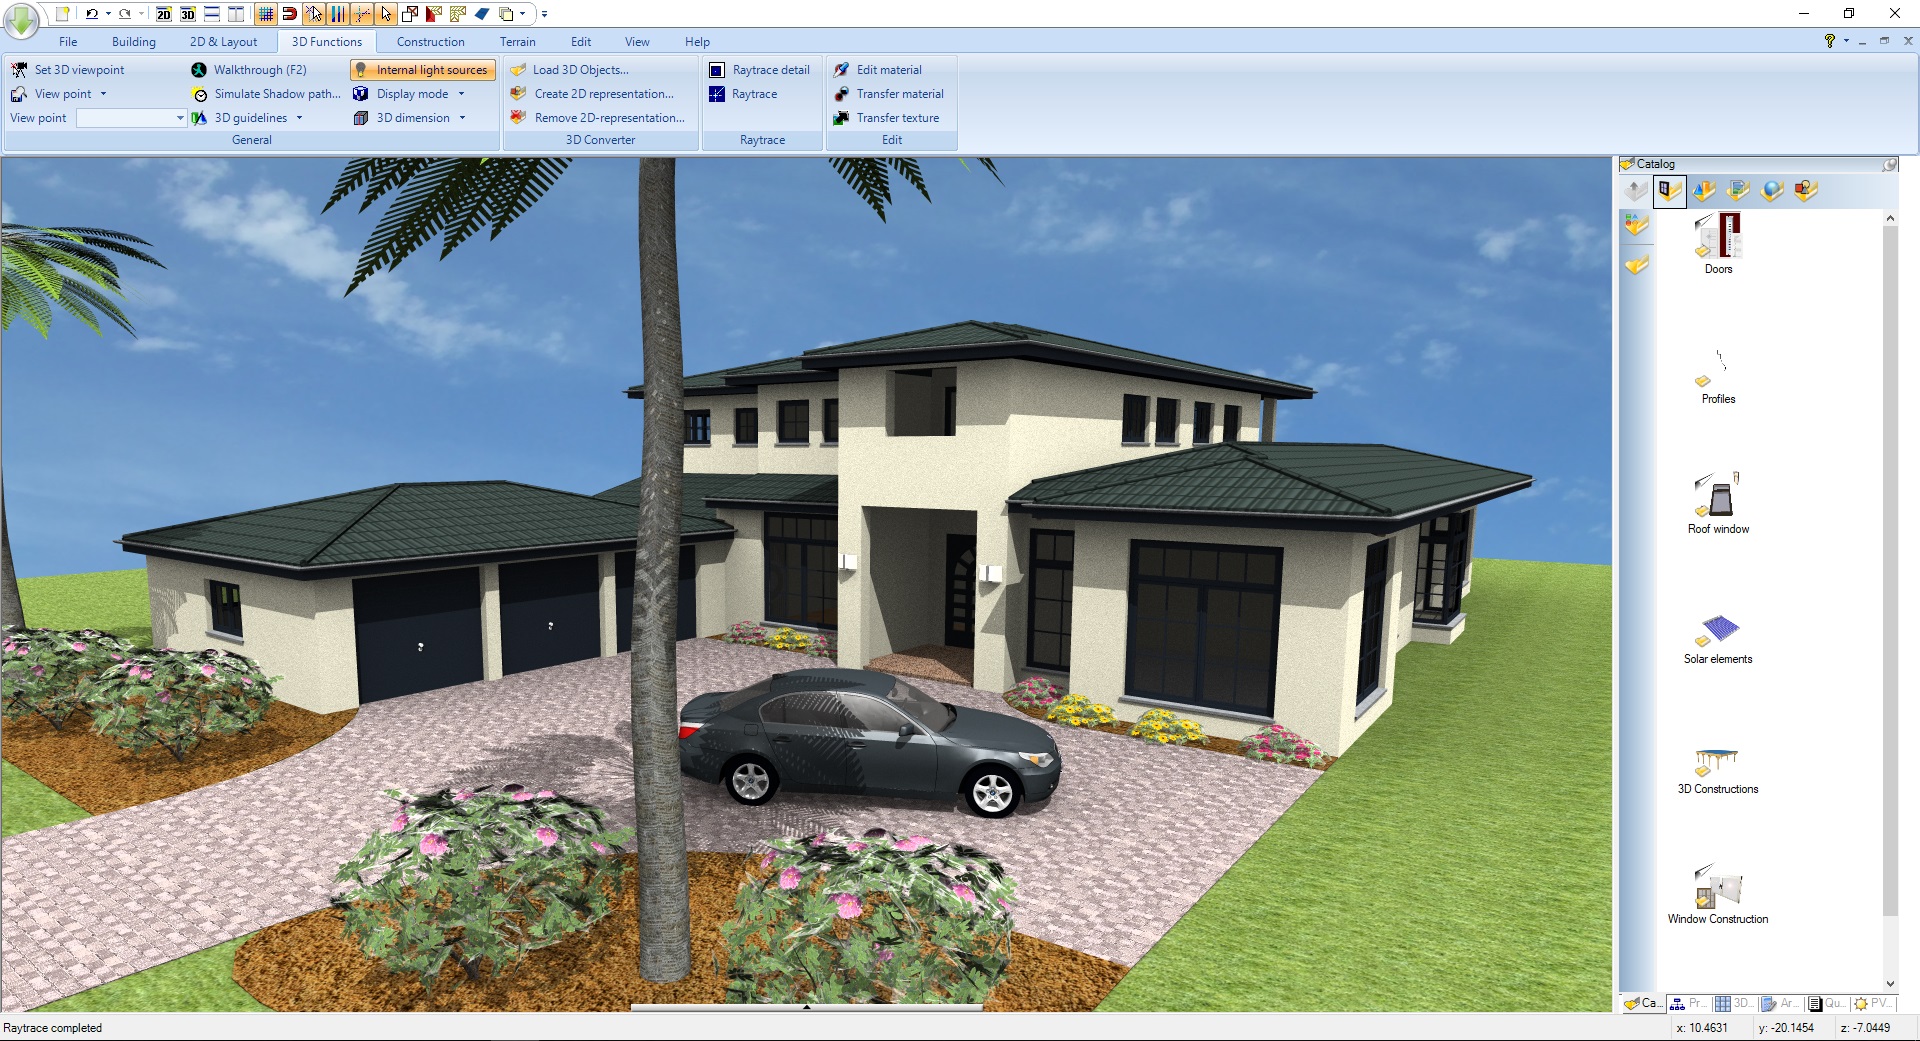 Save 50 on Home  Architect Design  your floor plans  in 3D  